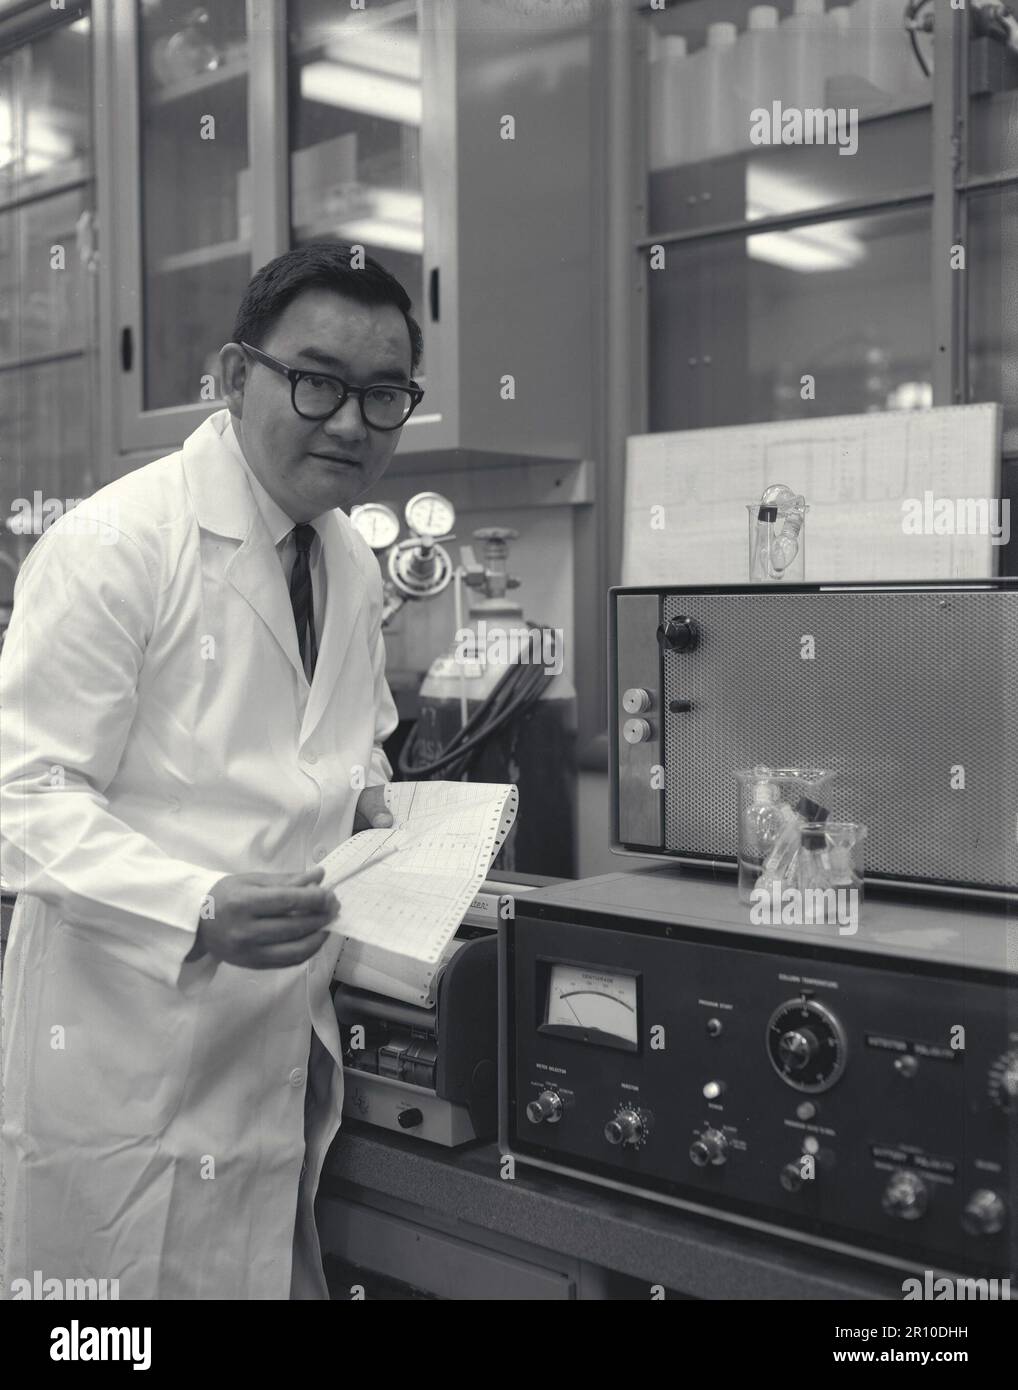 Moffett Field, California, USA. 7th Aug, 1965. Vance I. Oyama holds a readout from the gas chromatograph in the life detection laboratory at NASA's Ames Research Center in this picture from April 22, 1965. Oyama had a long career at NASA, during which he served as Life Detection Systems branch chief; he examined lunar soil samples and also helped design experiments for the Viking Mars Landers. Both he and his brother Jiro pioneered new areas of life sciences research at Ames. Credit: Emerson Shaw/NASA/ZUMA Press Wire Service/ZUMAPRESS.com/Alamy Live News Stock Photo